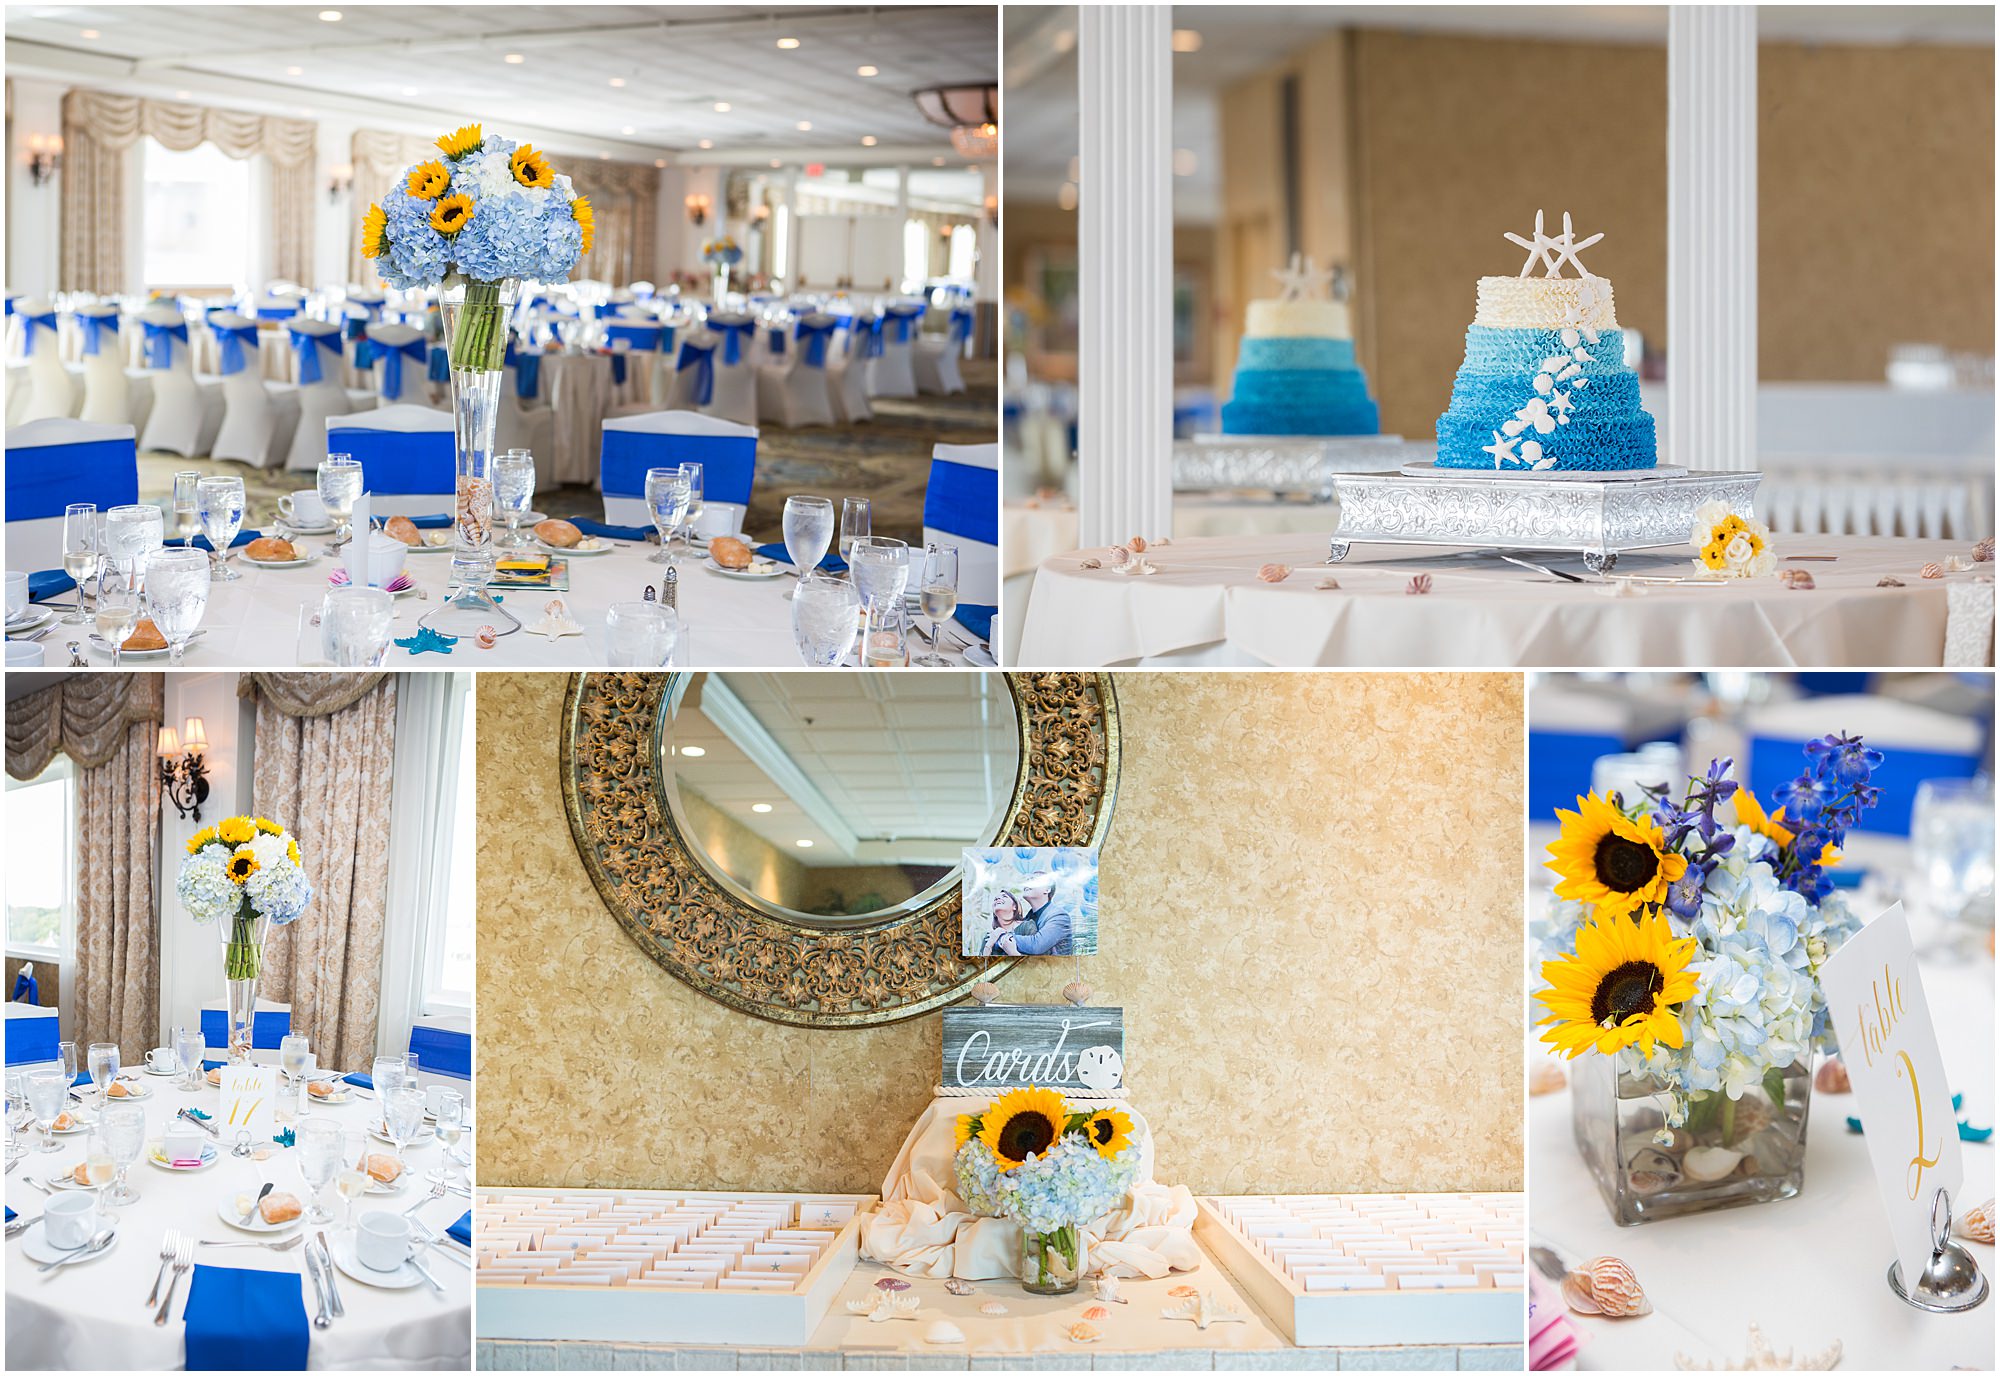 Best Wedding Venues in Cape May: The Grand Hotel Reception Decor